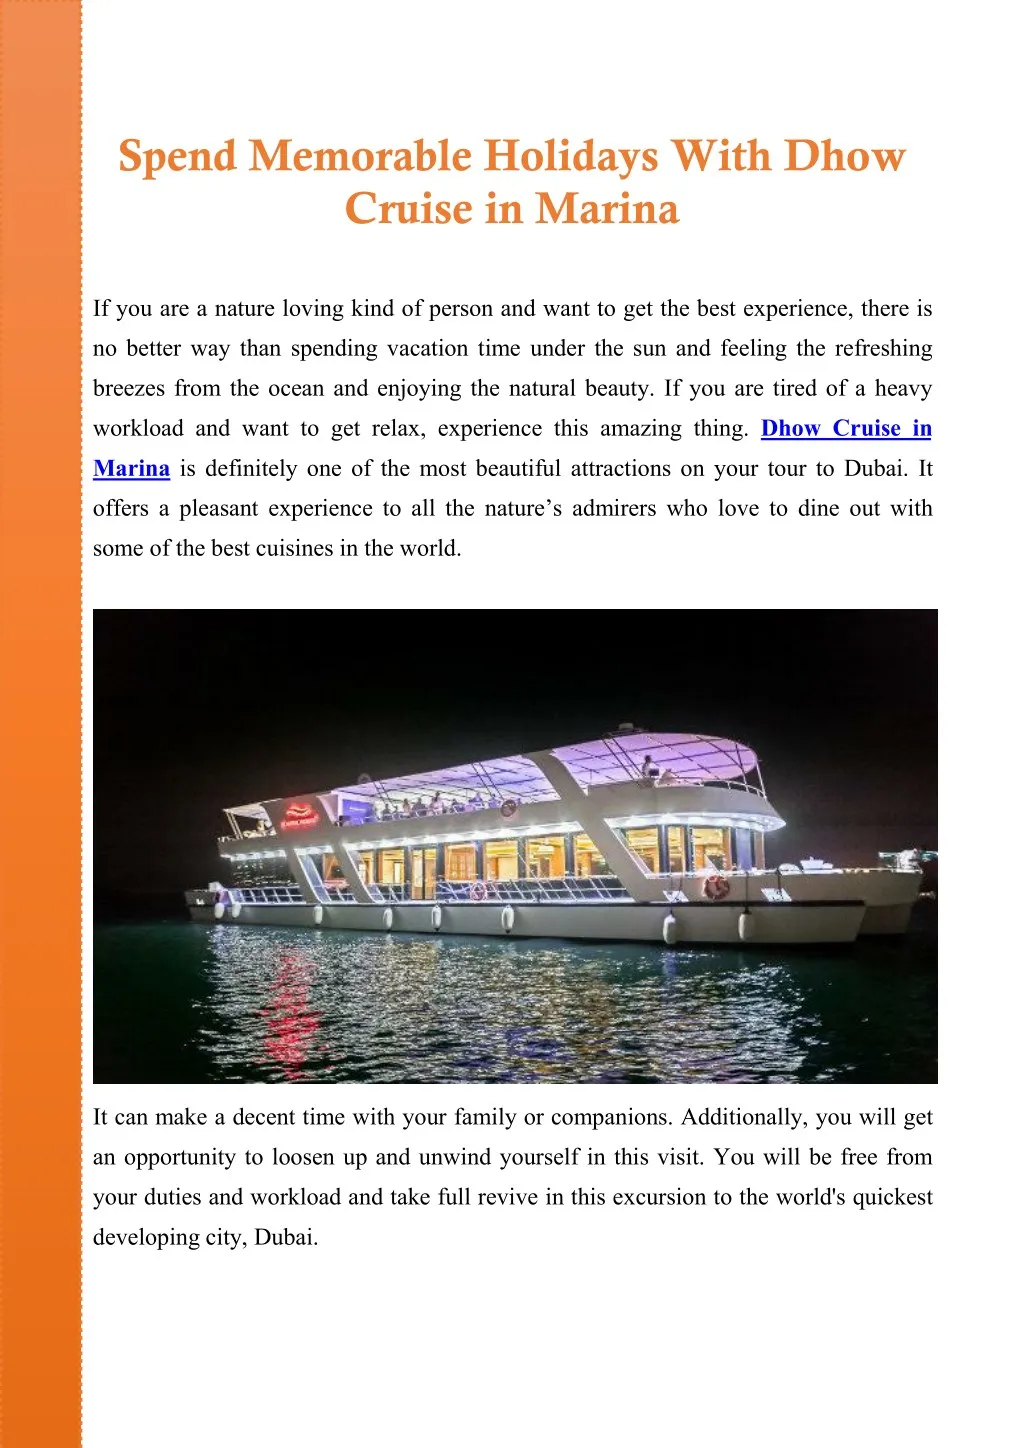 spend memorable holidays with dhow cruise